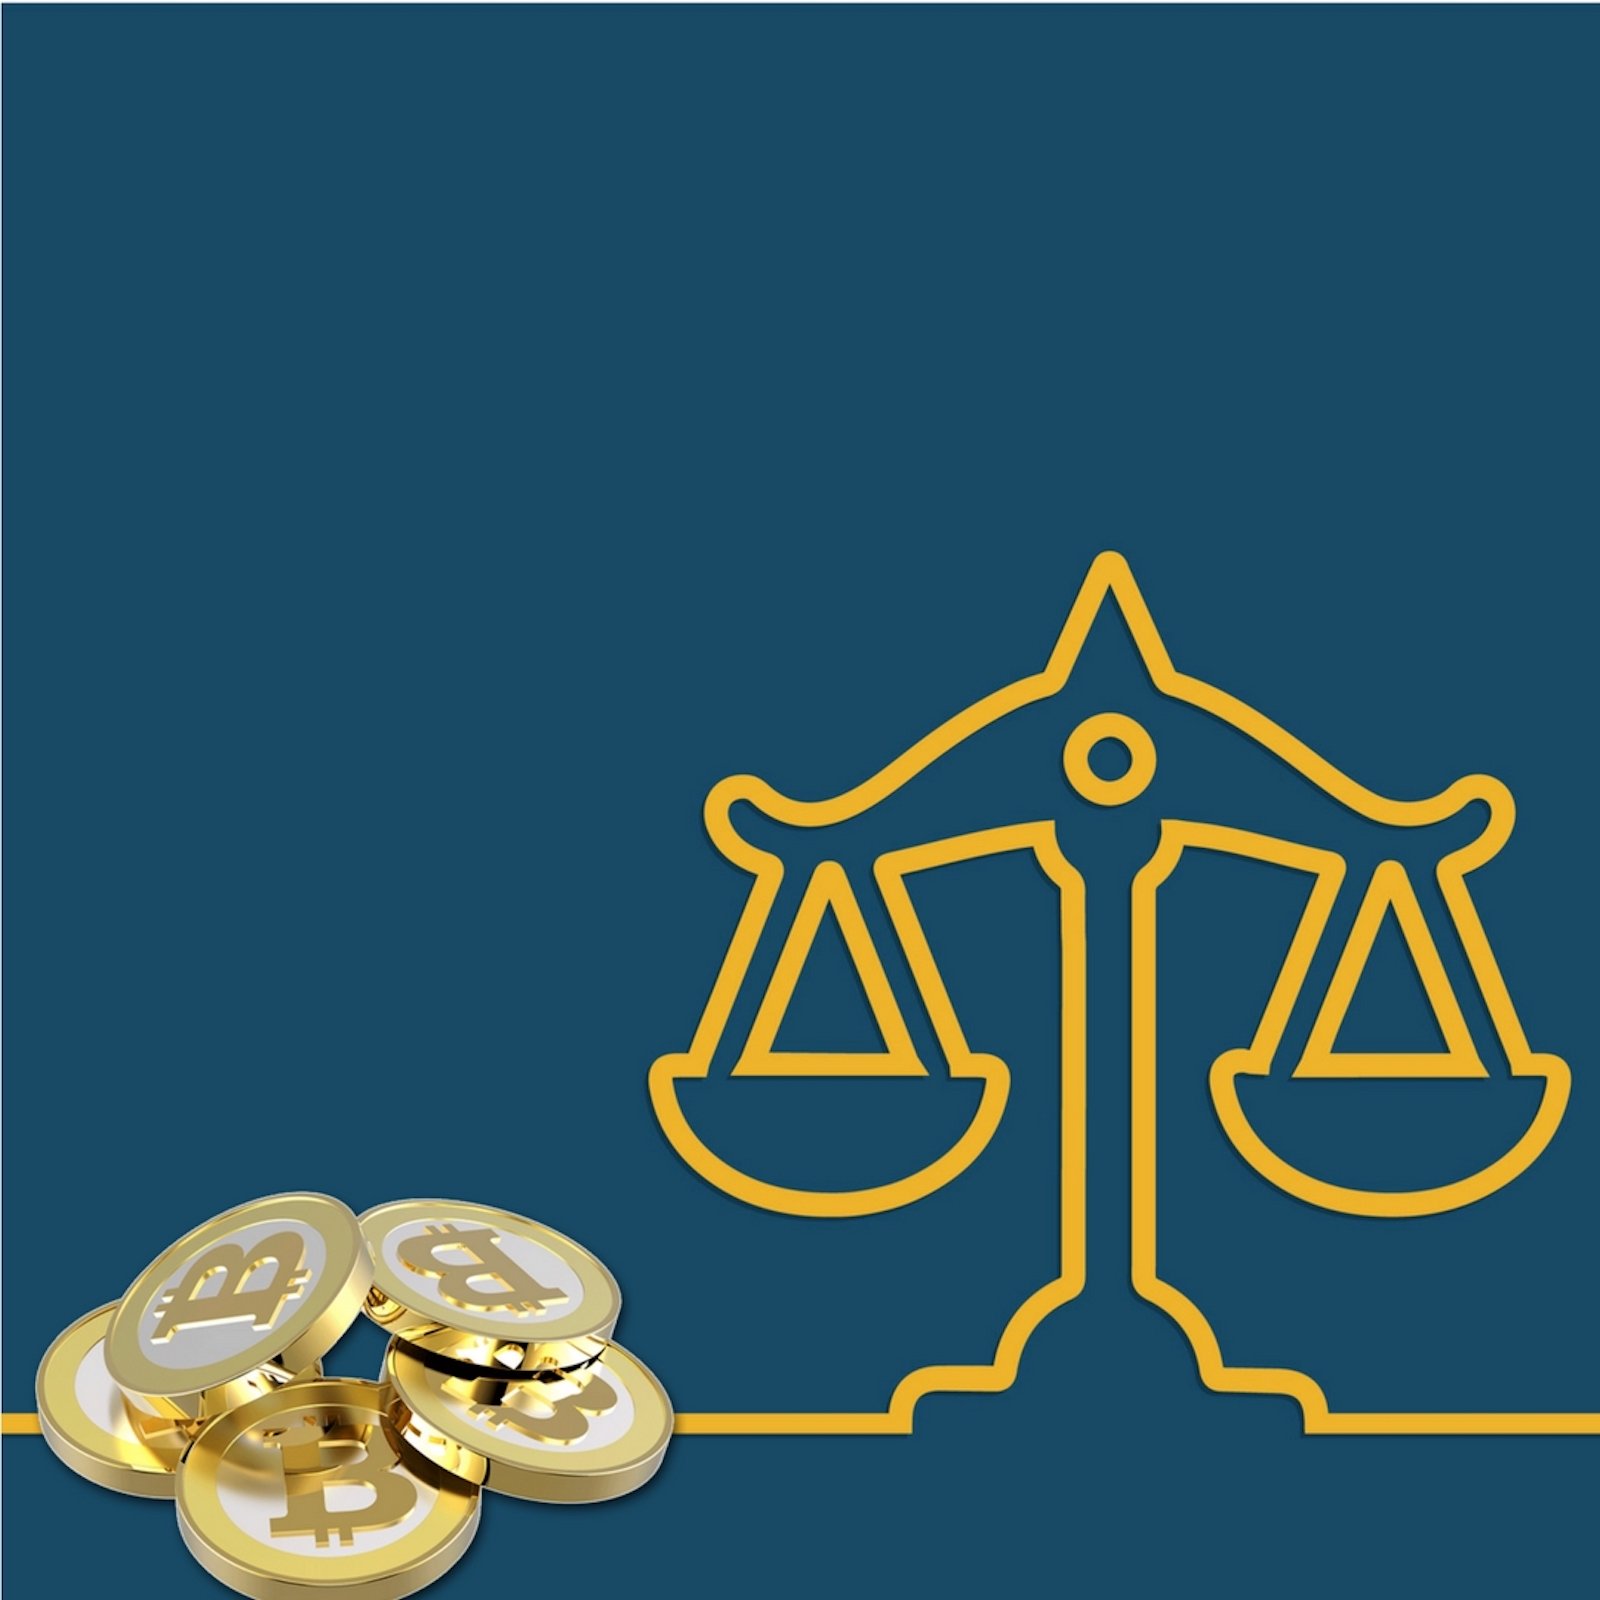 New Website Provides Guide to US Cryptocurrency Law